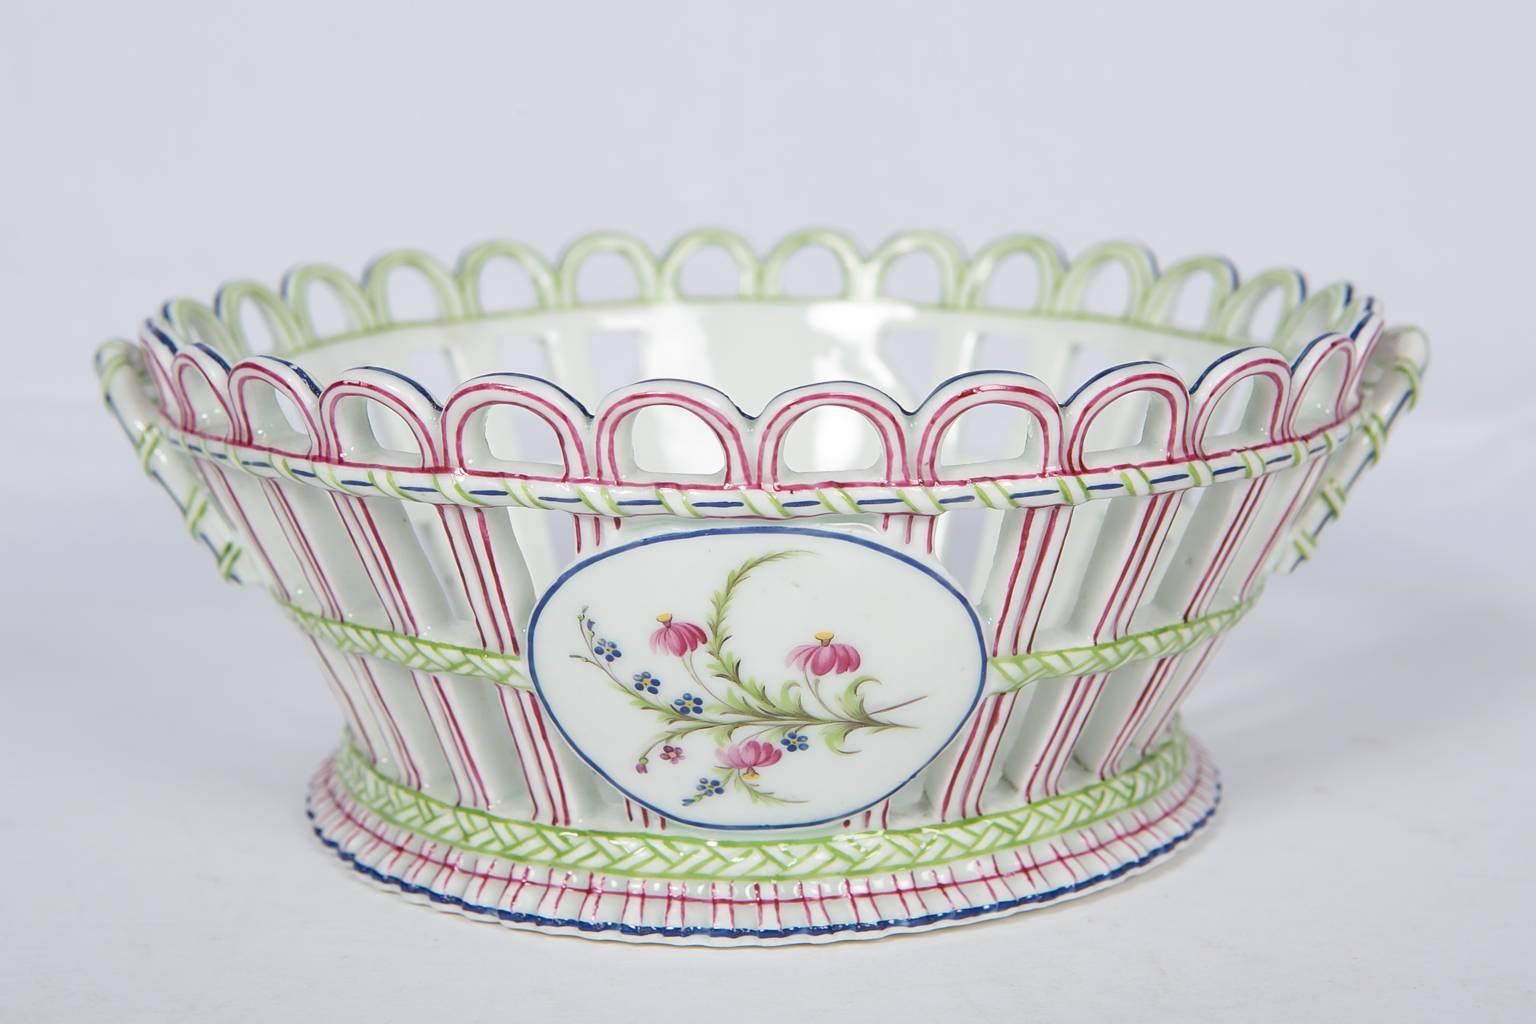 We are pleased to offer this set of three antique Niderviller porcelain open-work baskets. Made in France circa 1800, the open-work baskets are decorated with delicate, feminine flowers painted deep pink, soft green, and blue. Each basket has two